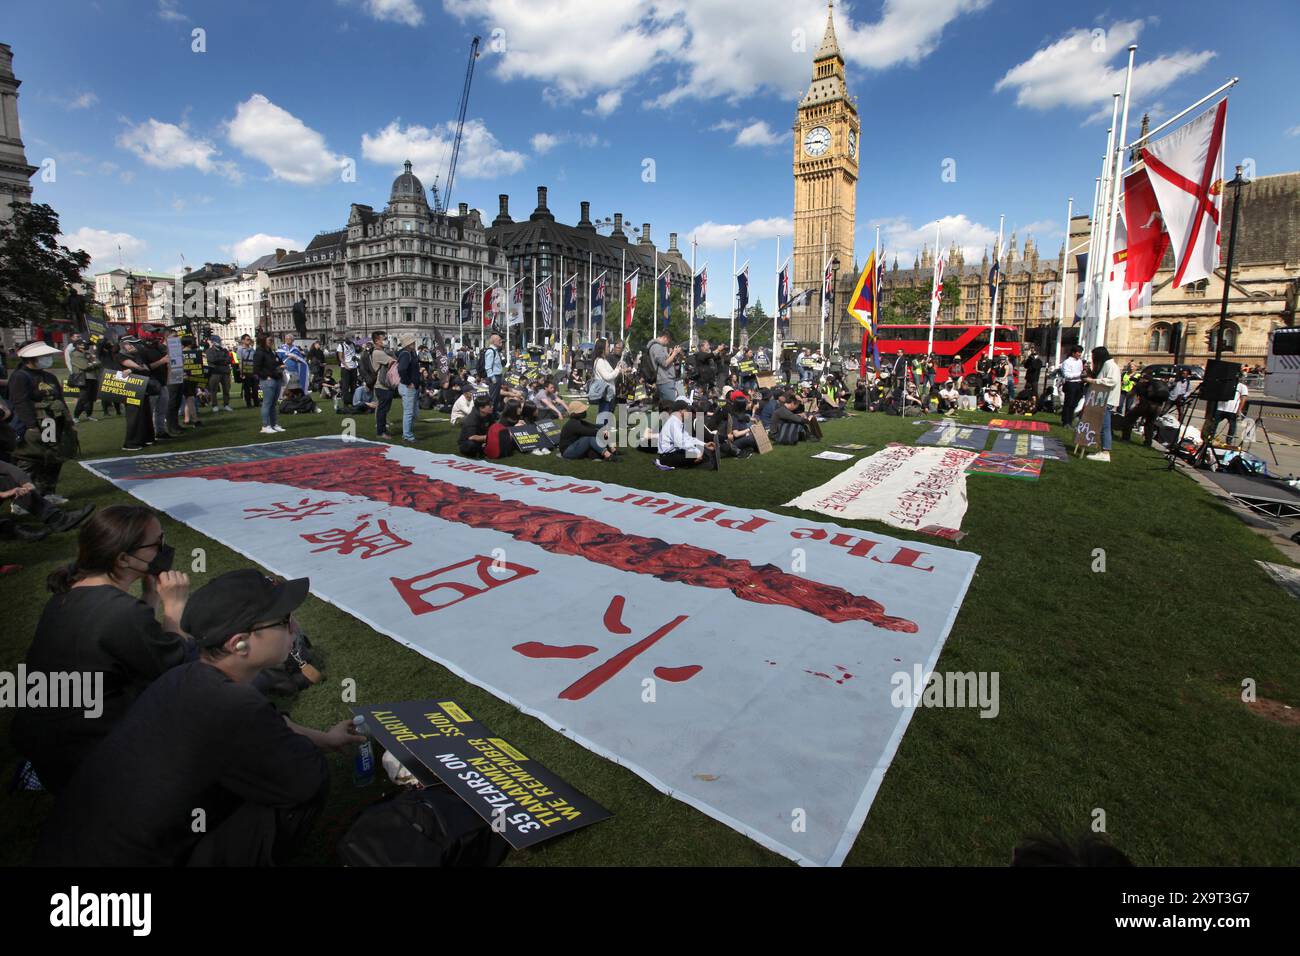 June 2, 2024, London, England, UK: Protesters gather in Parliament Square alongside a large banner saying ''˜the Pillar Of Shame' during the demonstration. The event commemorated the1989 student-led protests and the Chinese government's bloody crackdown on 4 June, as well as protest against China's current clampdown on freedom of speech - including its increasing repression of Tibetans and Uyghurs, its crushing of dissent in Hong Kong, and the intimidation of Chinese and Hong Kong students in the UK, Europe and North America. Thirty-five years on, the Chinese authorities still ban informatio Stock Photo